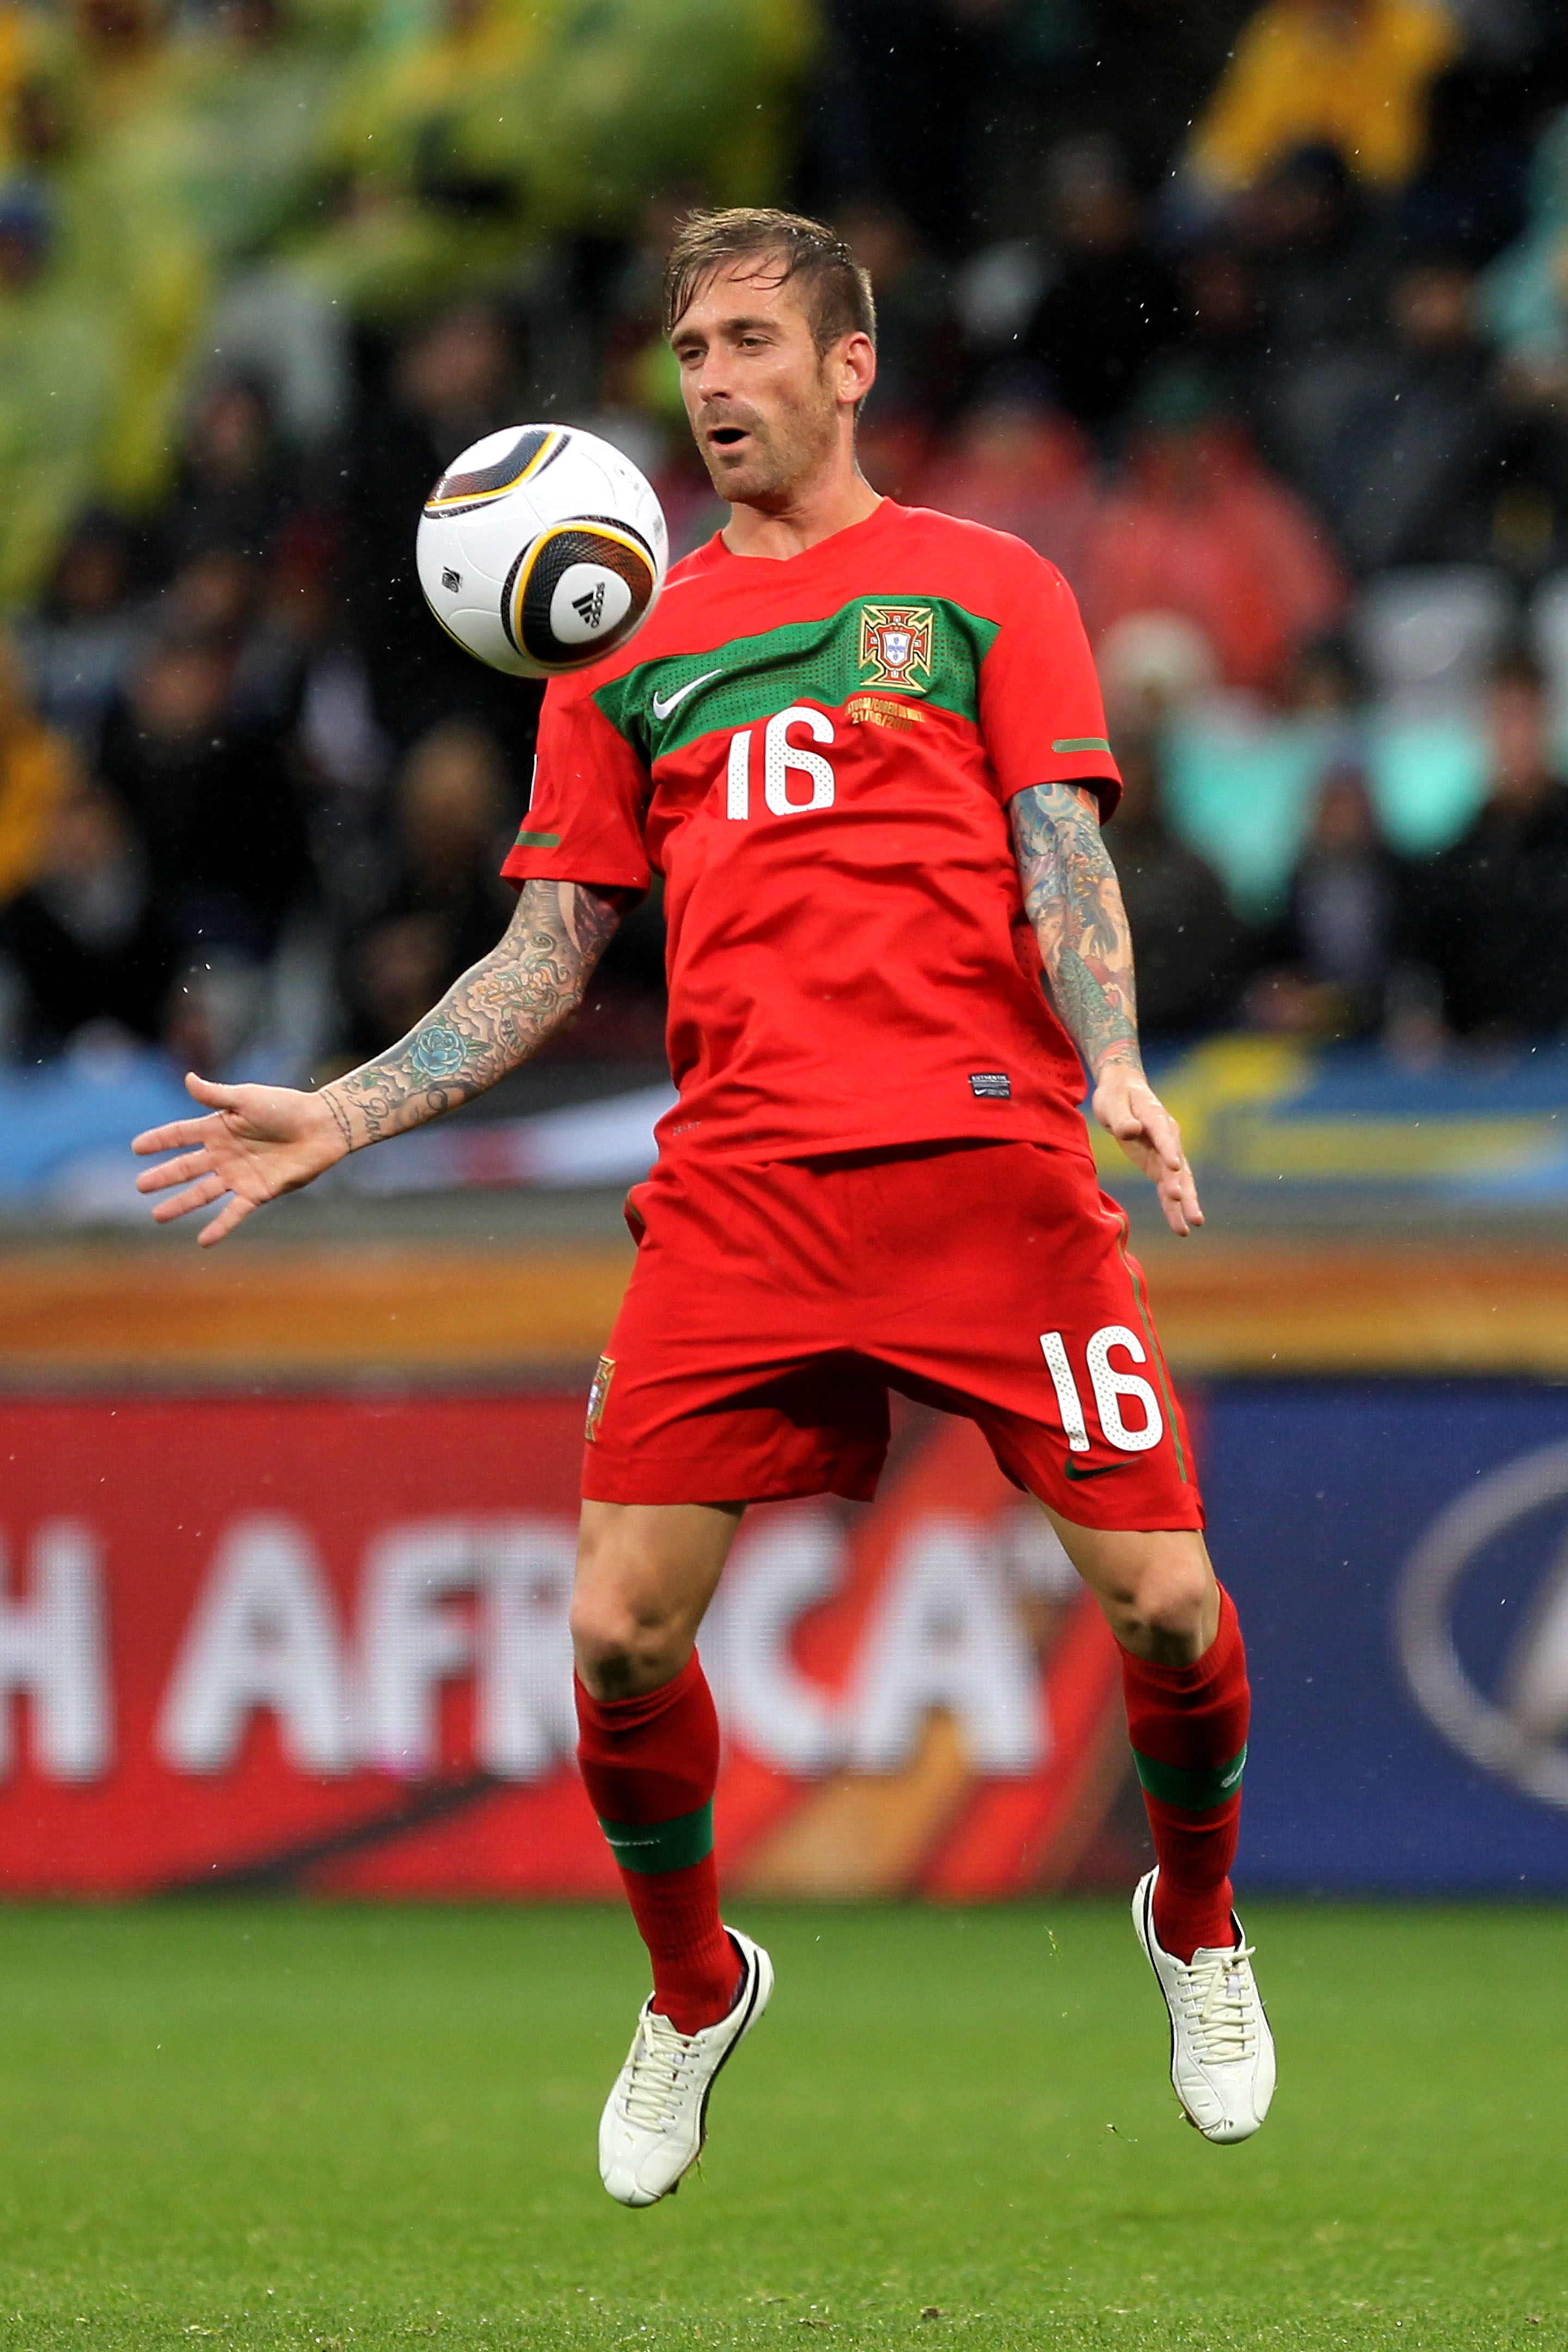 CAPE TOWN, SOUTH AFRICA - JUNE 21:  Raul Meireles of Portugal controls the ball during the 2010 FIFA World Cup South Africa Group G match between Portugal and North Korea at the Green Point Stadium on June 21, 2010 in Cape Town, South Africa.  (Photo by D